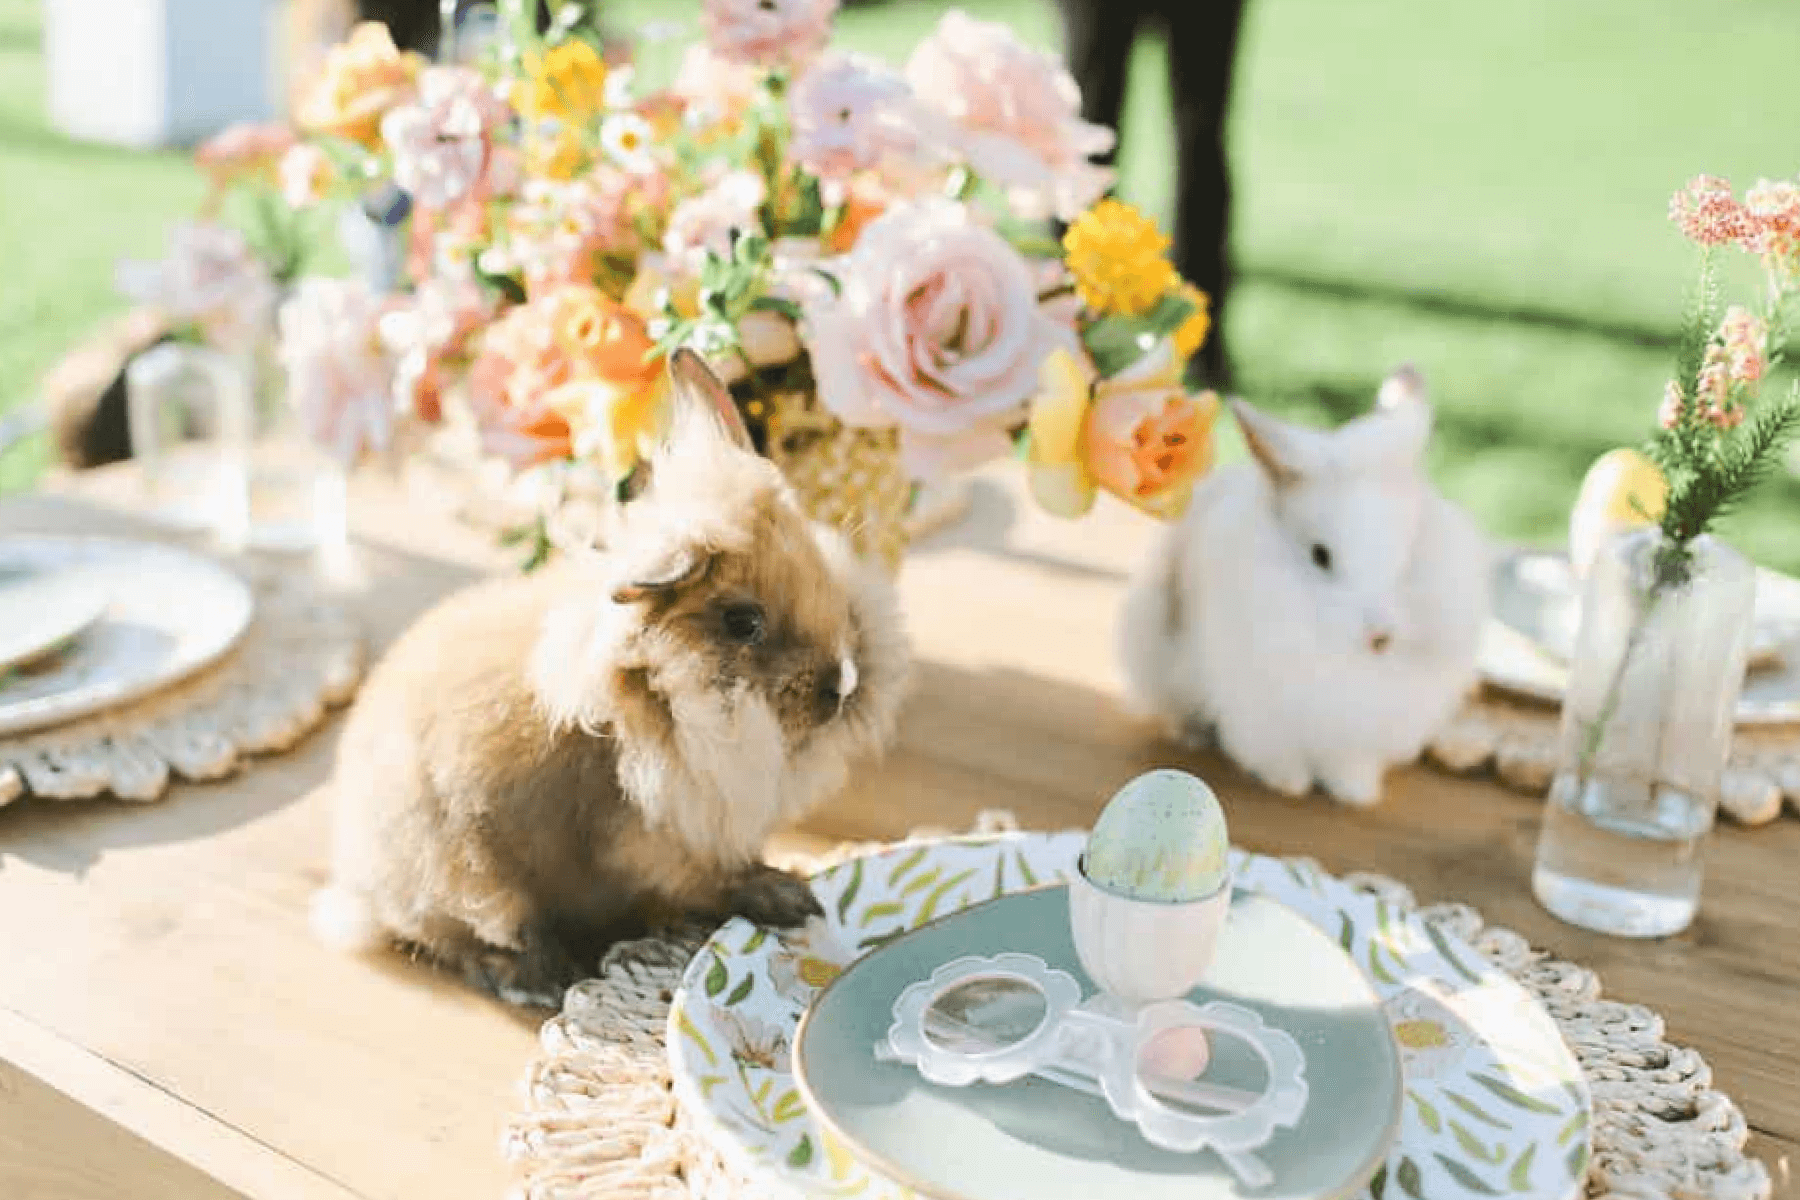 11 party ideas for Easter that will have the whole family hopping